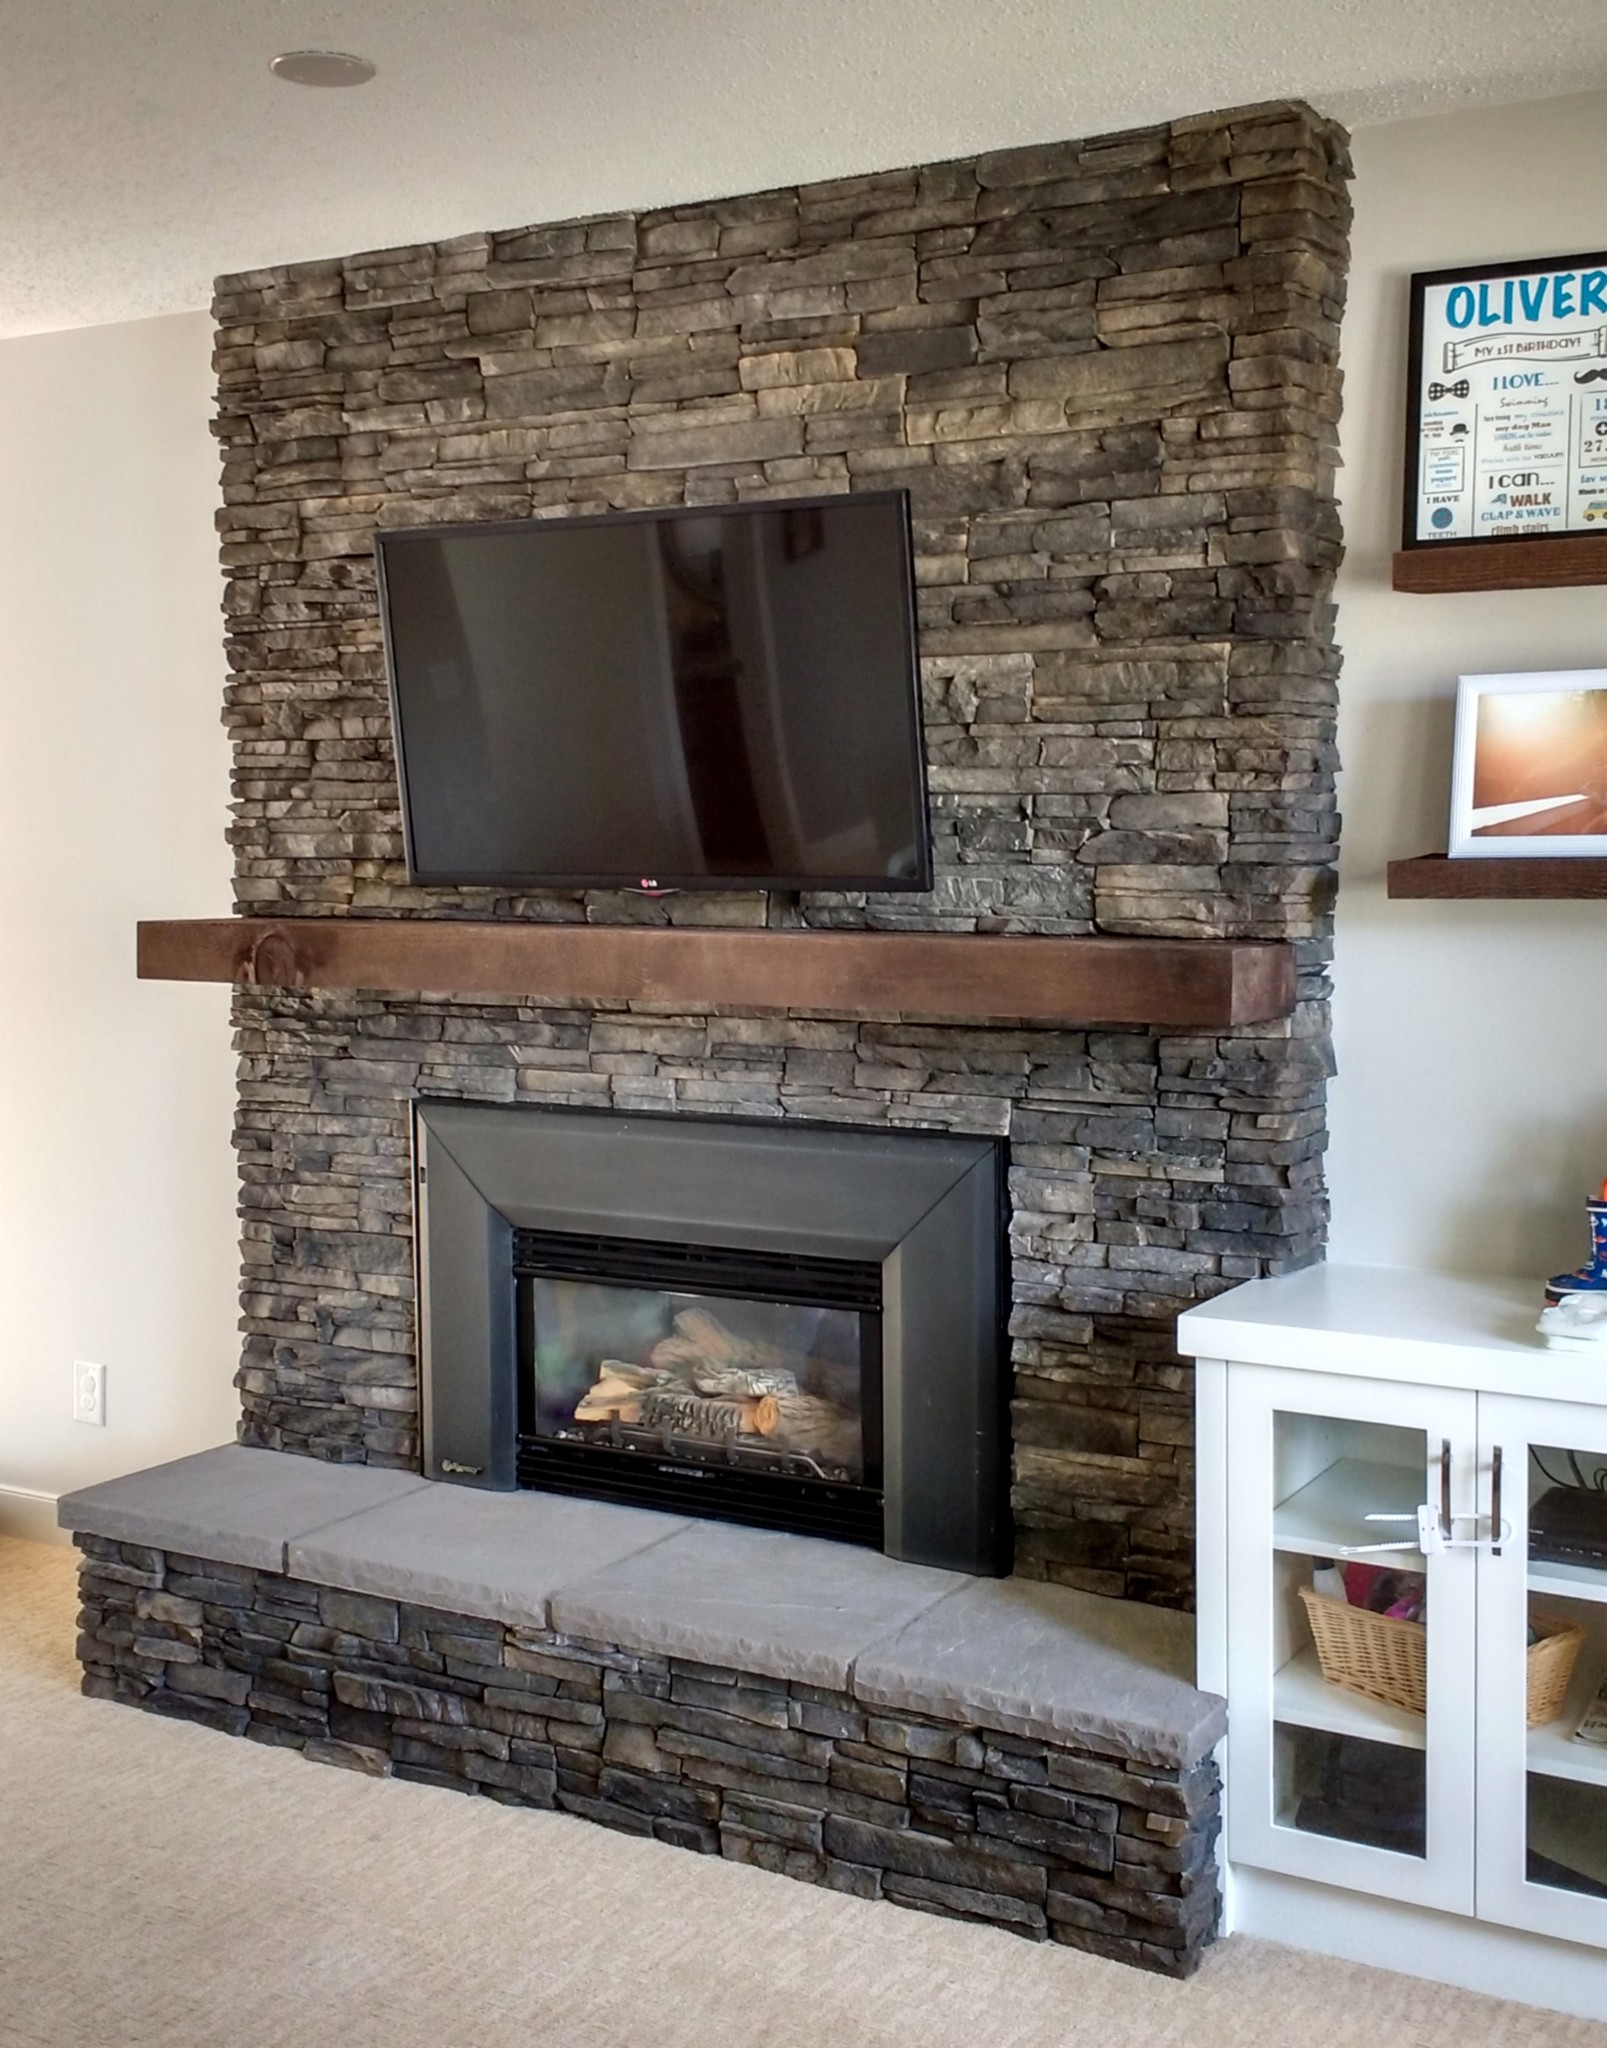 Sandstone Fireplace Hearths Lovely Fireplace with Hearth Brick Cover Up Ecostone Products